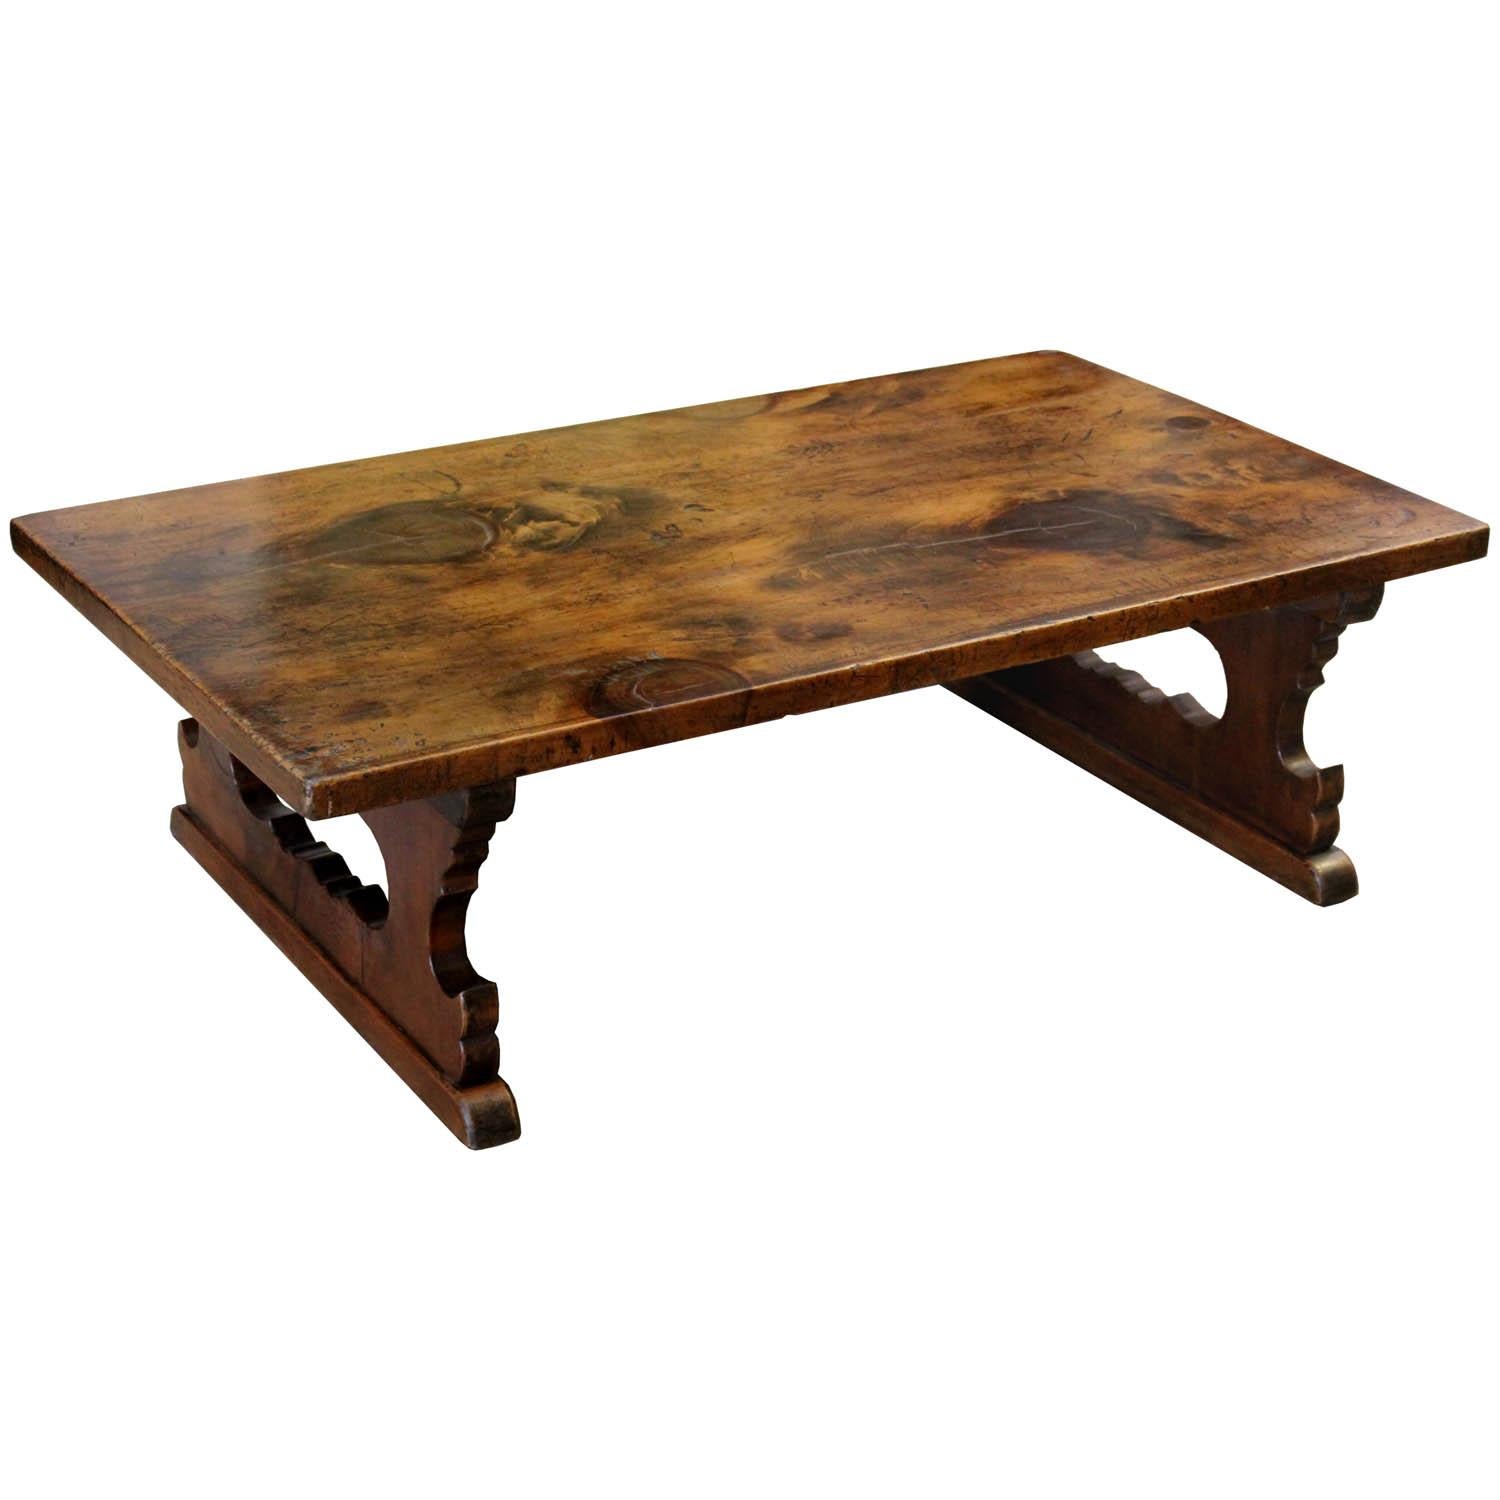 Originally used as a writing table by students or merchants in Japan. Meiji period, circa 1890s. Scholar's table can be utilized as a low coffee table with accessories on it. Made from kuri (chestnut) wood.


